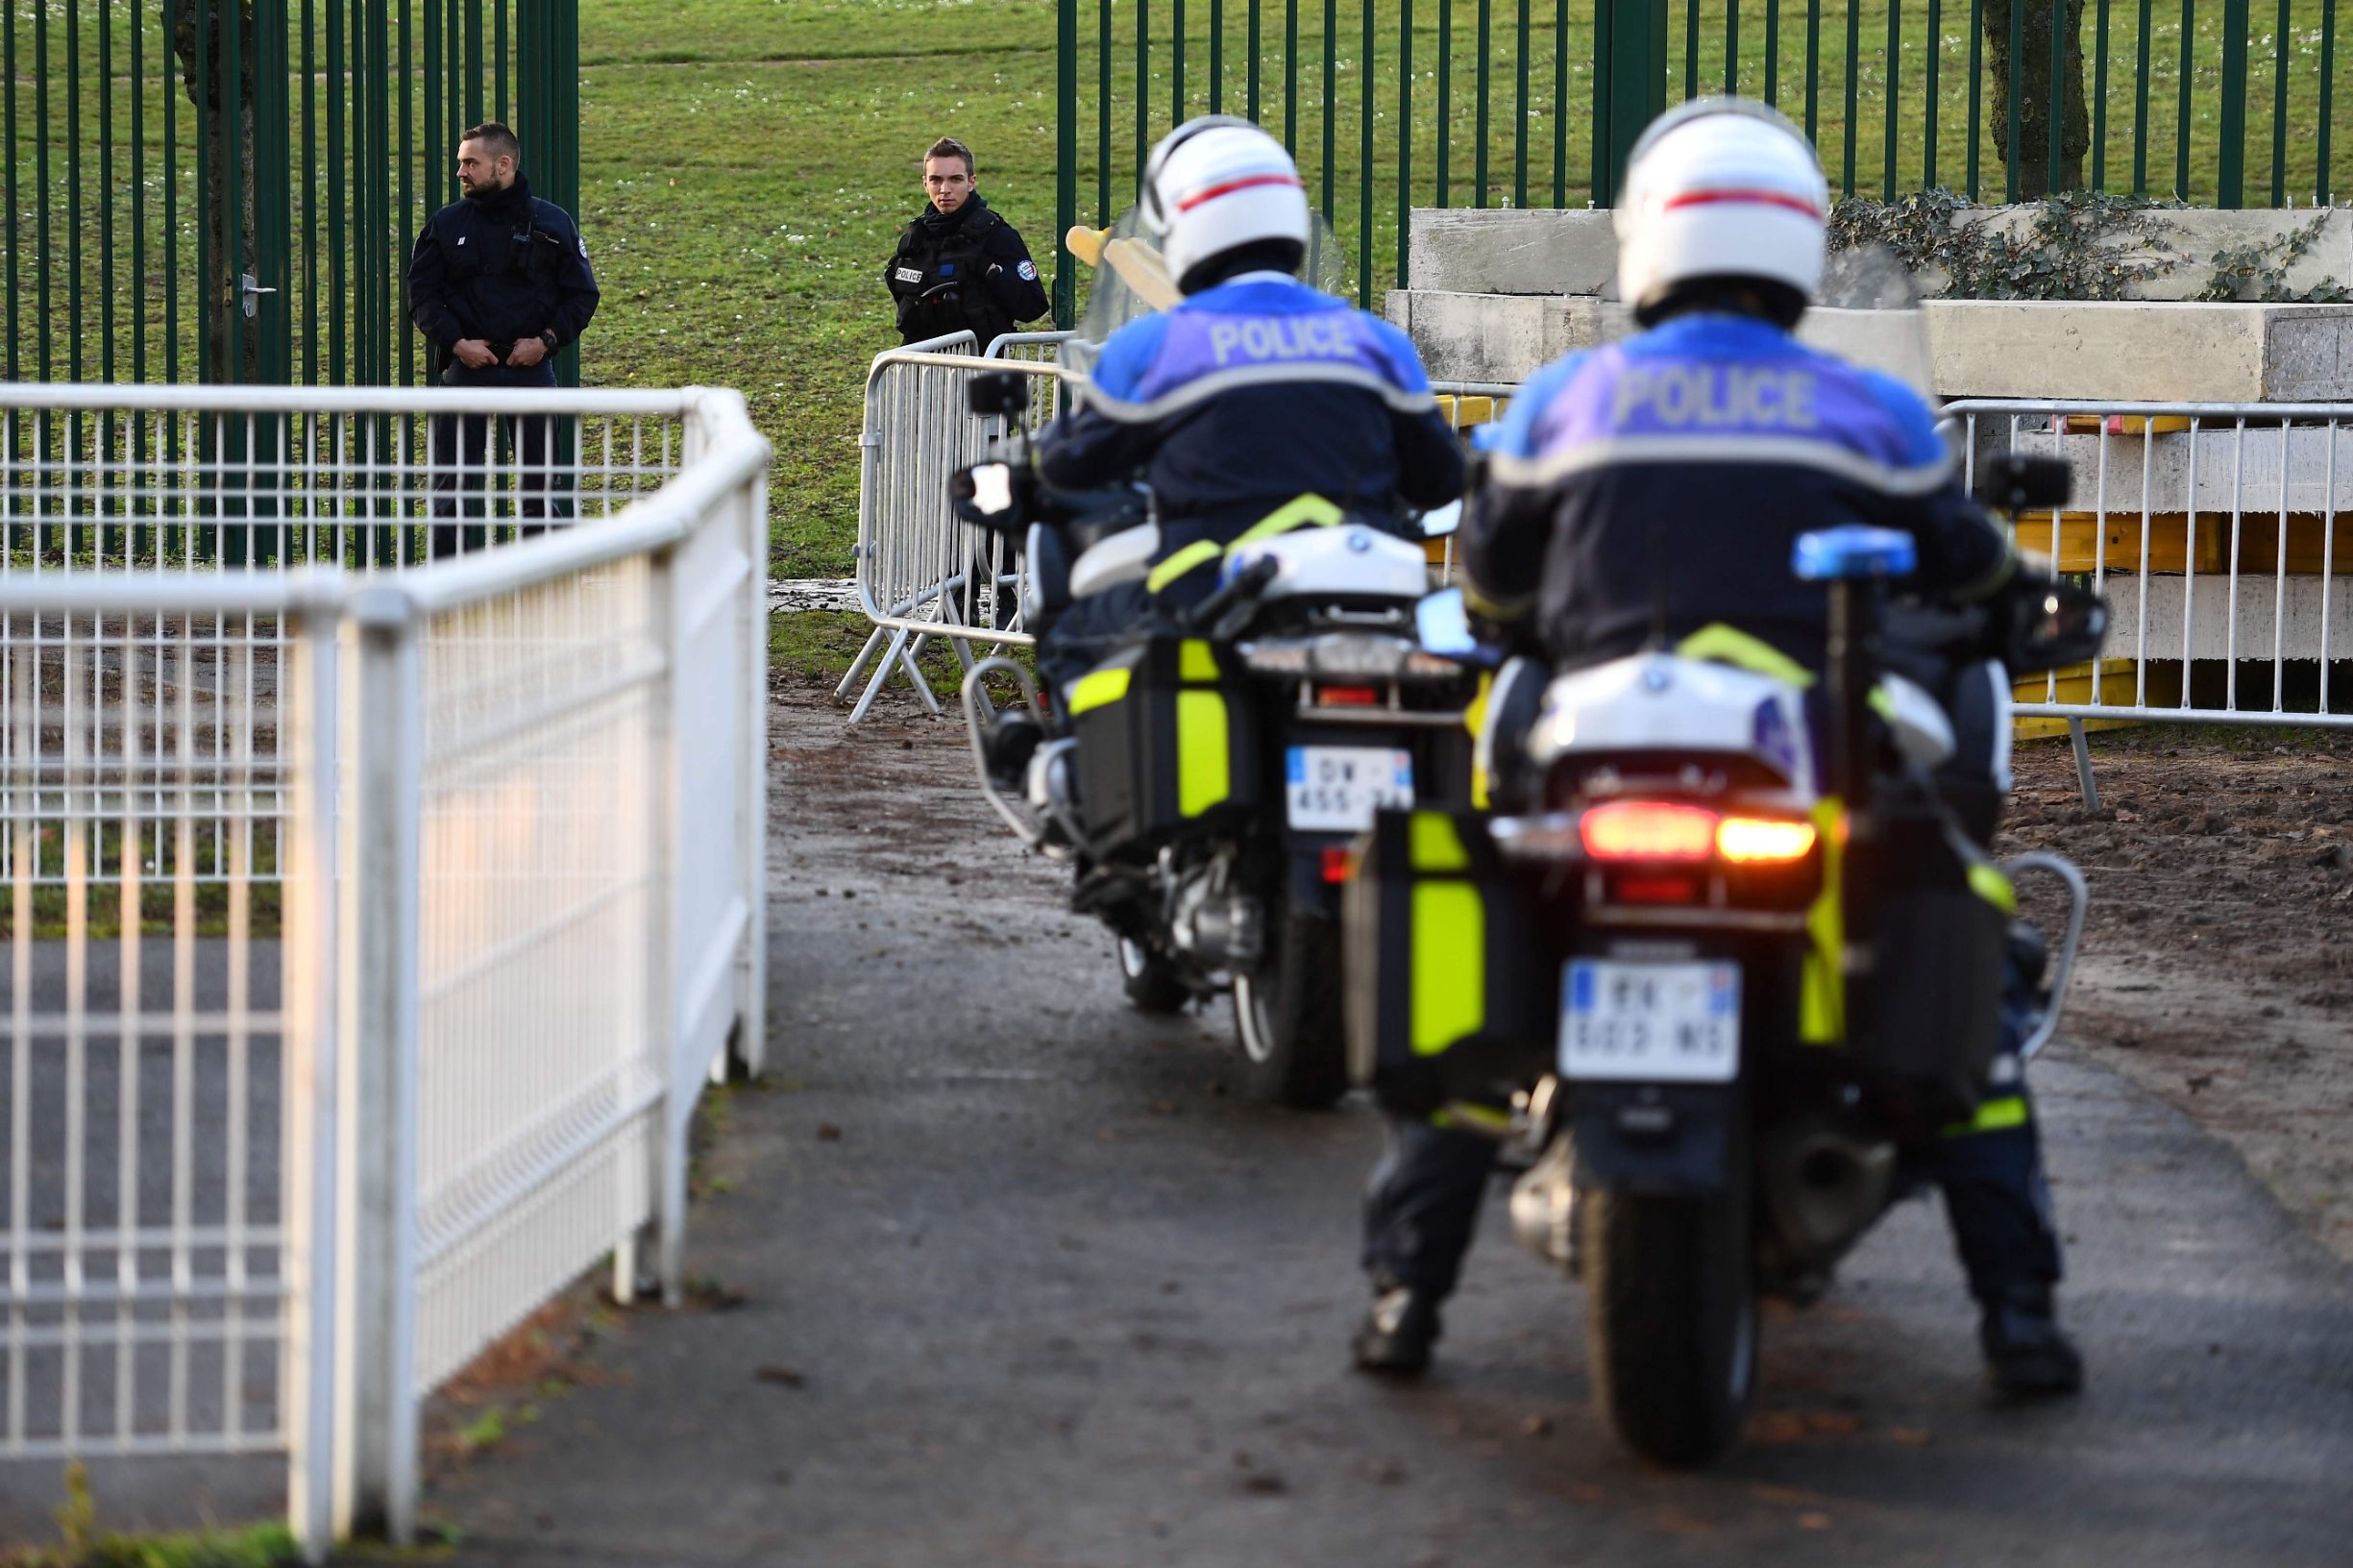 Police officers gather in a park in the south of Paris' suburban city of Villejuif on January 3, 2020 where a man was shot and killed by officers after stabbing passers-by. - The man had attacked 